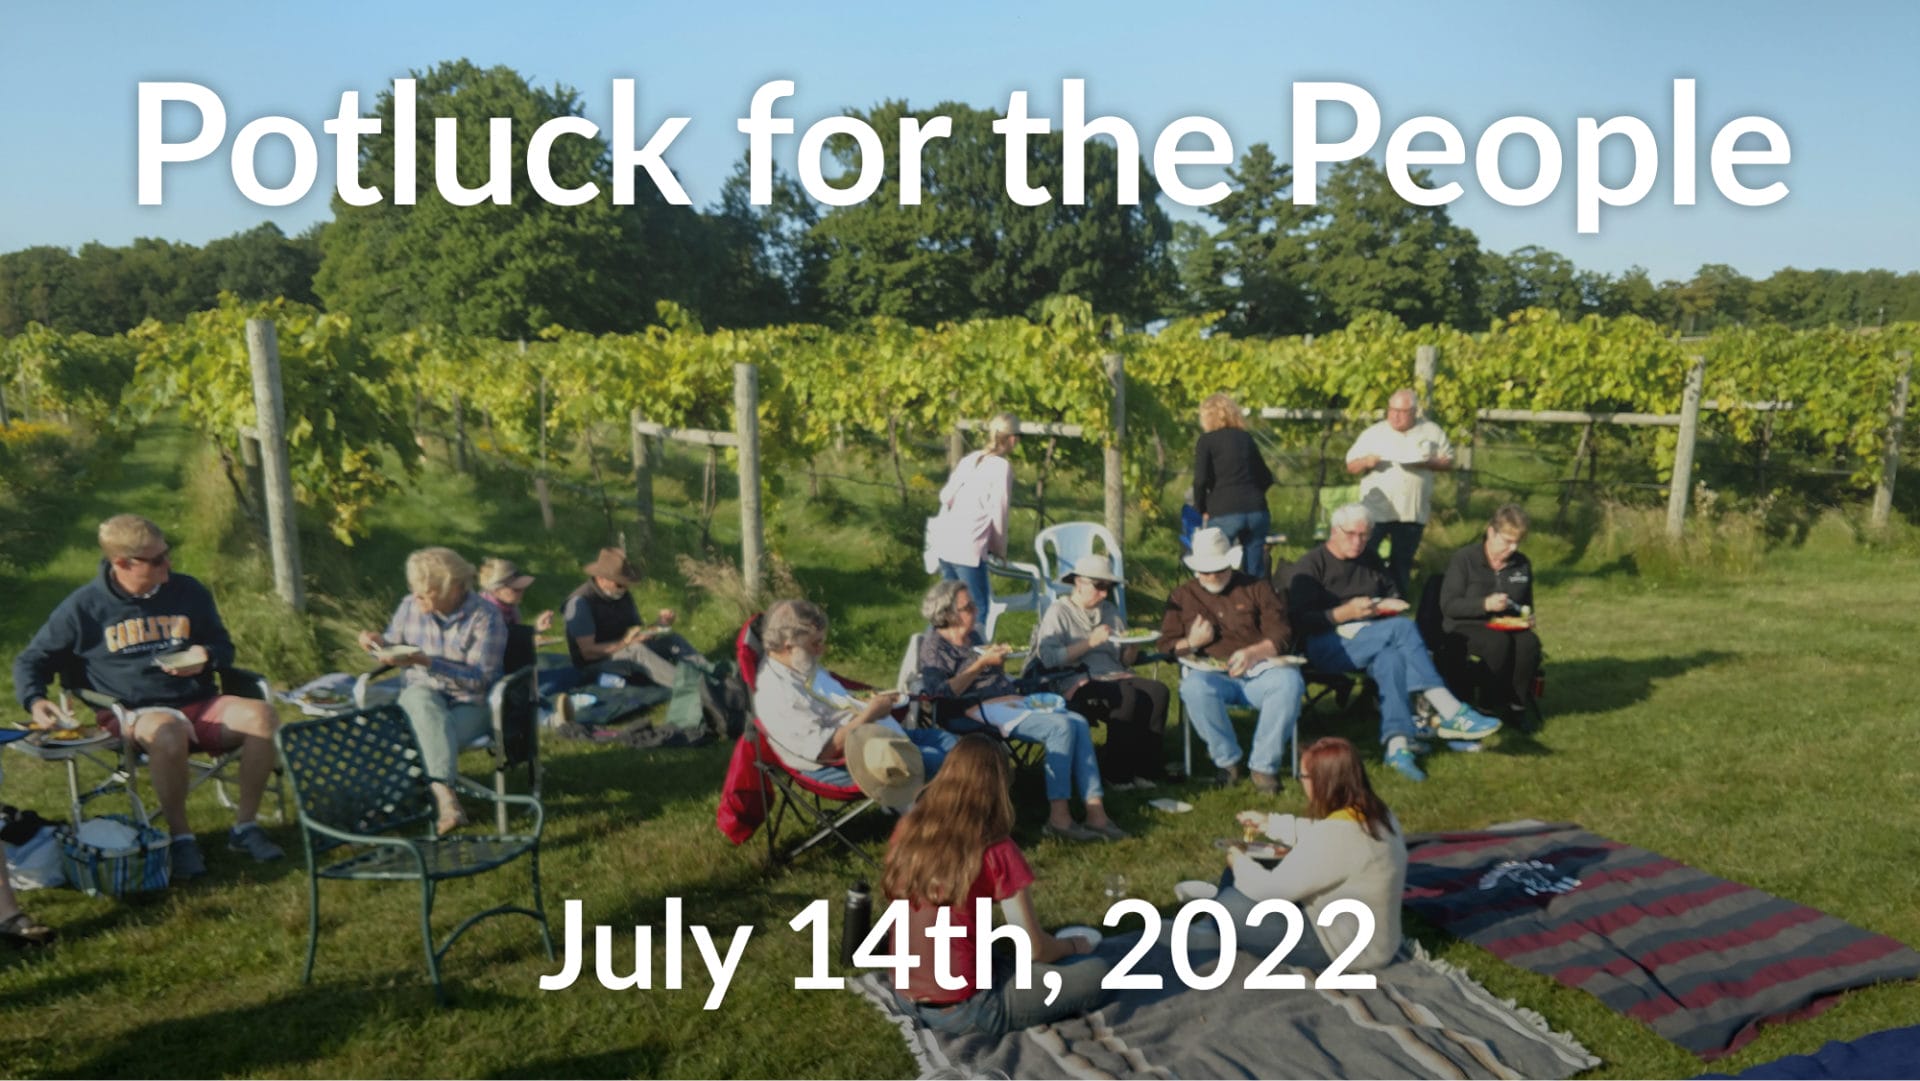 sixteen people sitting in chairs and on picnic blankets in front of the vineyard, sharing a potluck meal, with text that reads "Potluck for the People, July 14th, 2022"